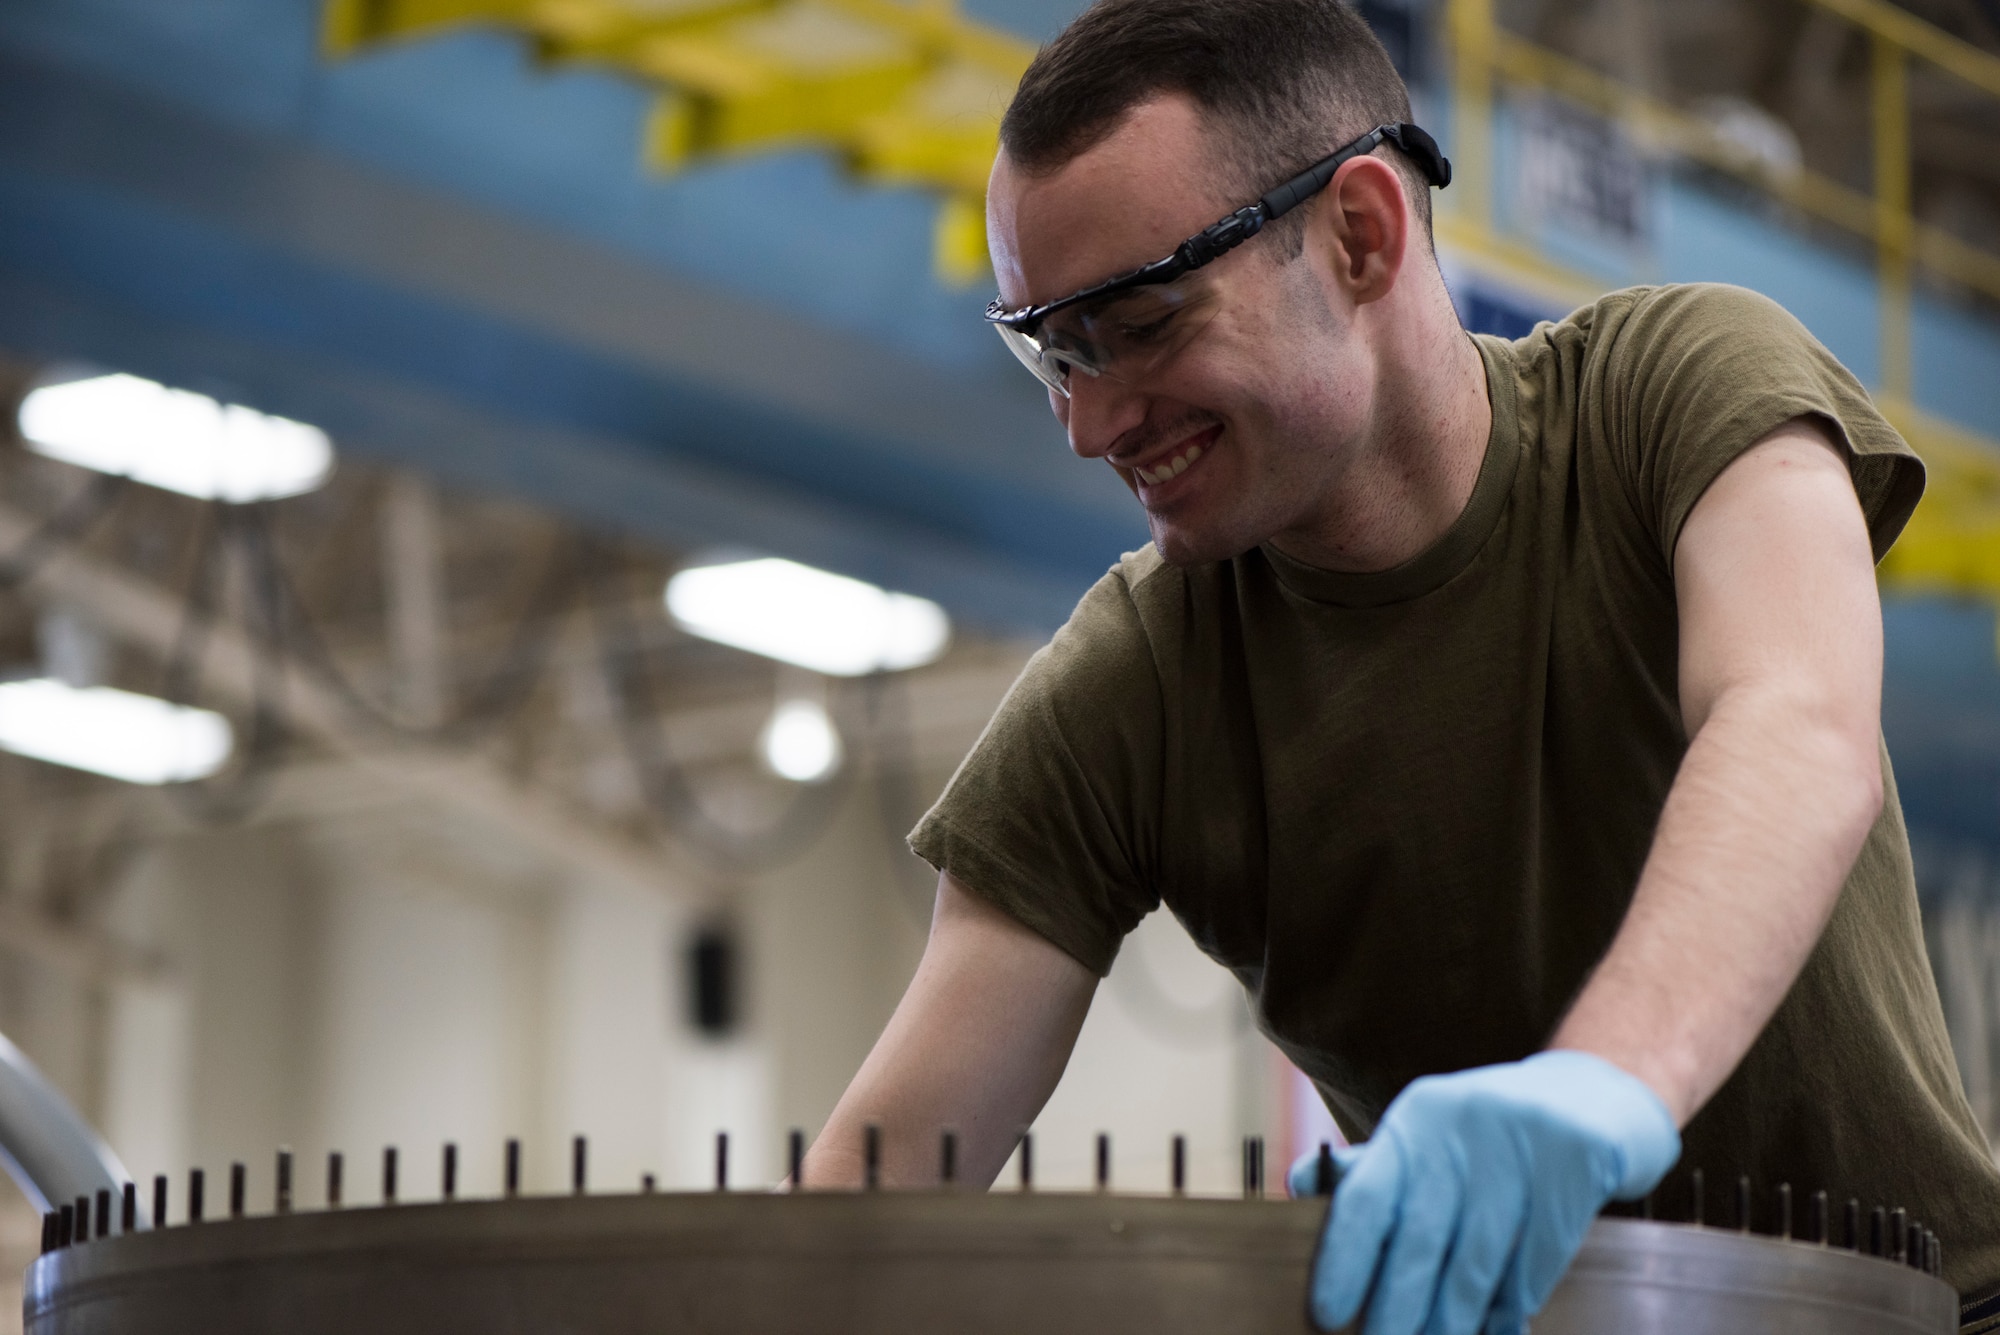 U.S. Air Force Airman 1st Class Connor Howard, a 35th Maintenance Squadron aerospace propulsion journeyman, performs maintenance at Misawa Air Base, Japan, July 16, 2019. Leadership increased their space within the shop by installing a new storage facility, which aided the team in servicing a record breaking number of engines in a month since the late 2000s. (U.S. Air Force photo by Senior Airman Collette Brooks)